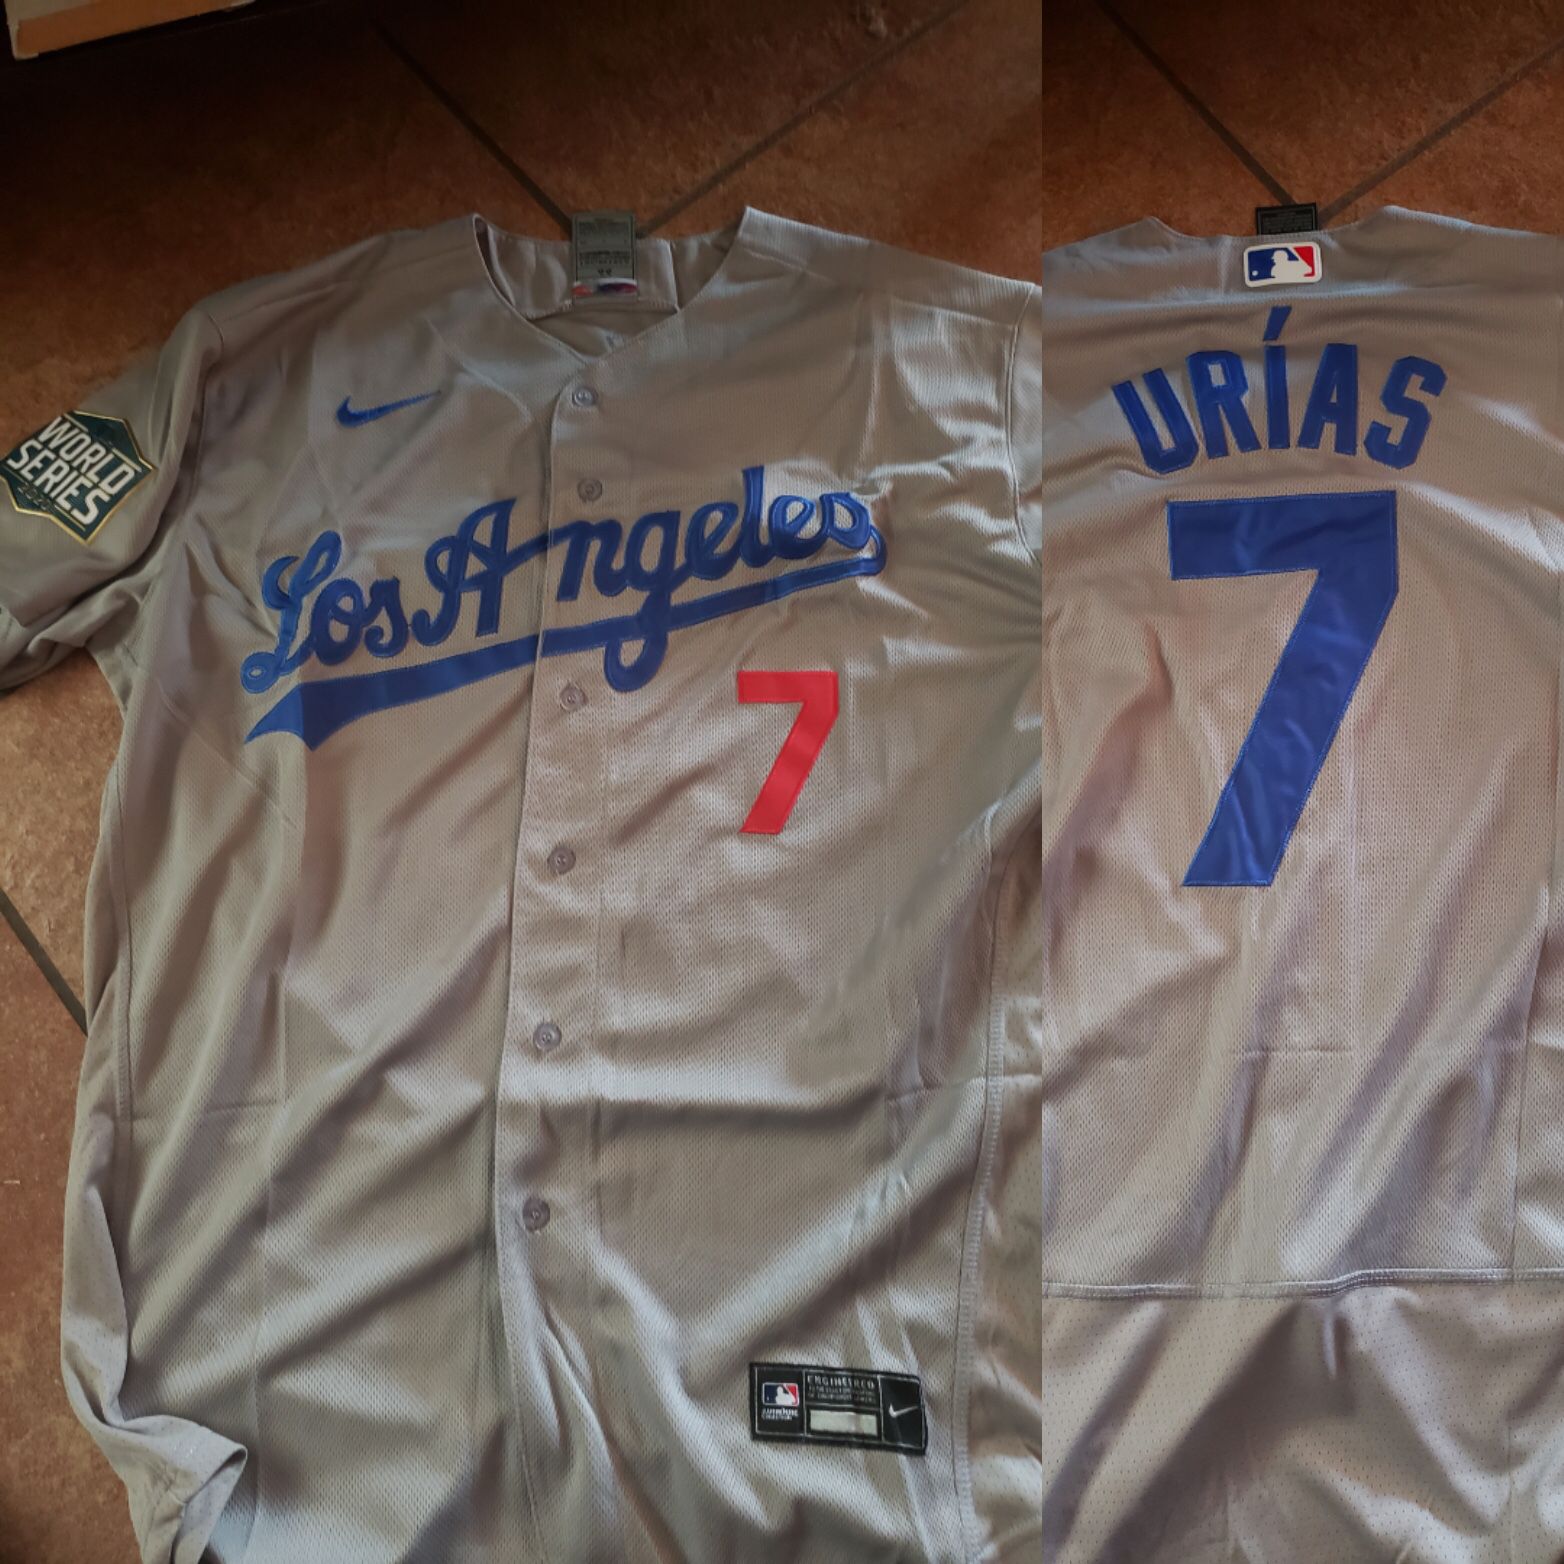 Dodgers grey urias World Series patch jersey size medium to 3xl stitched firm price pick up only